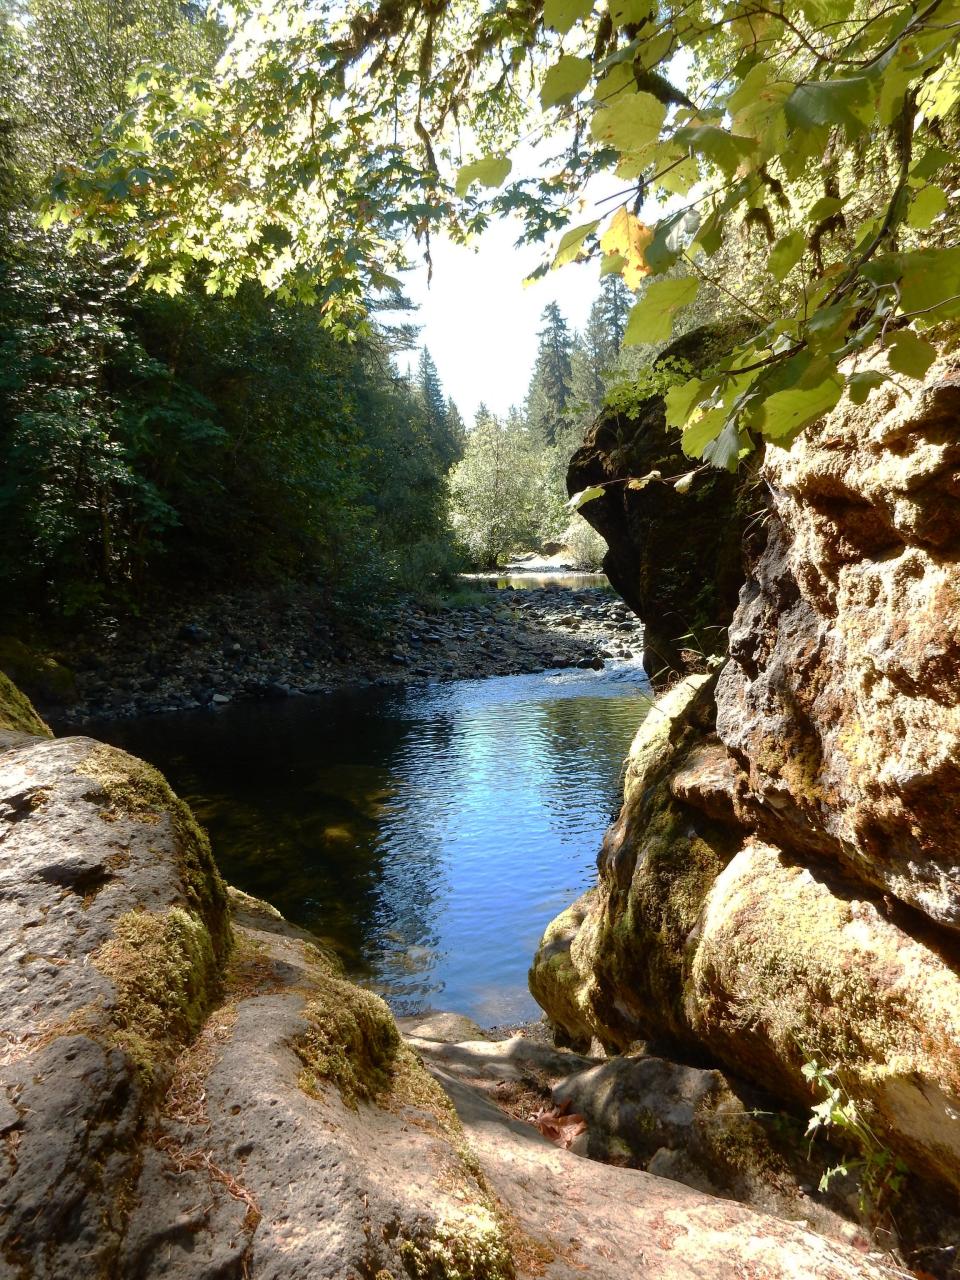 Across from Sharps Creek Recreation Site, a swimming hole sits surrounded by rounded boulders.